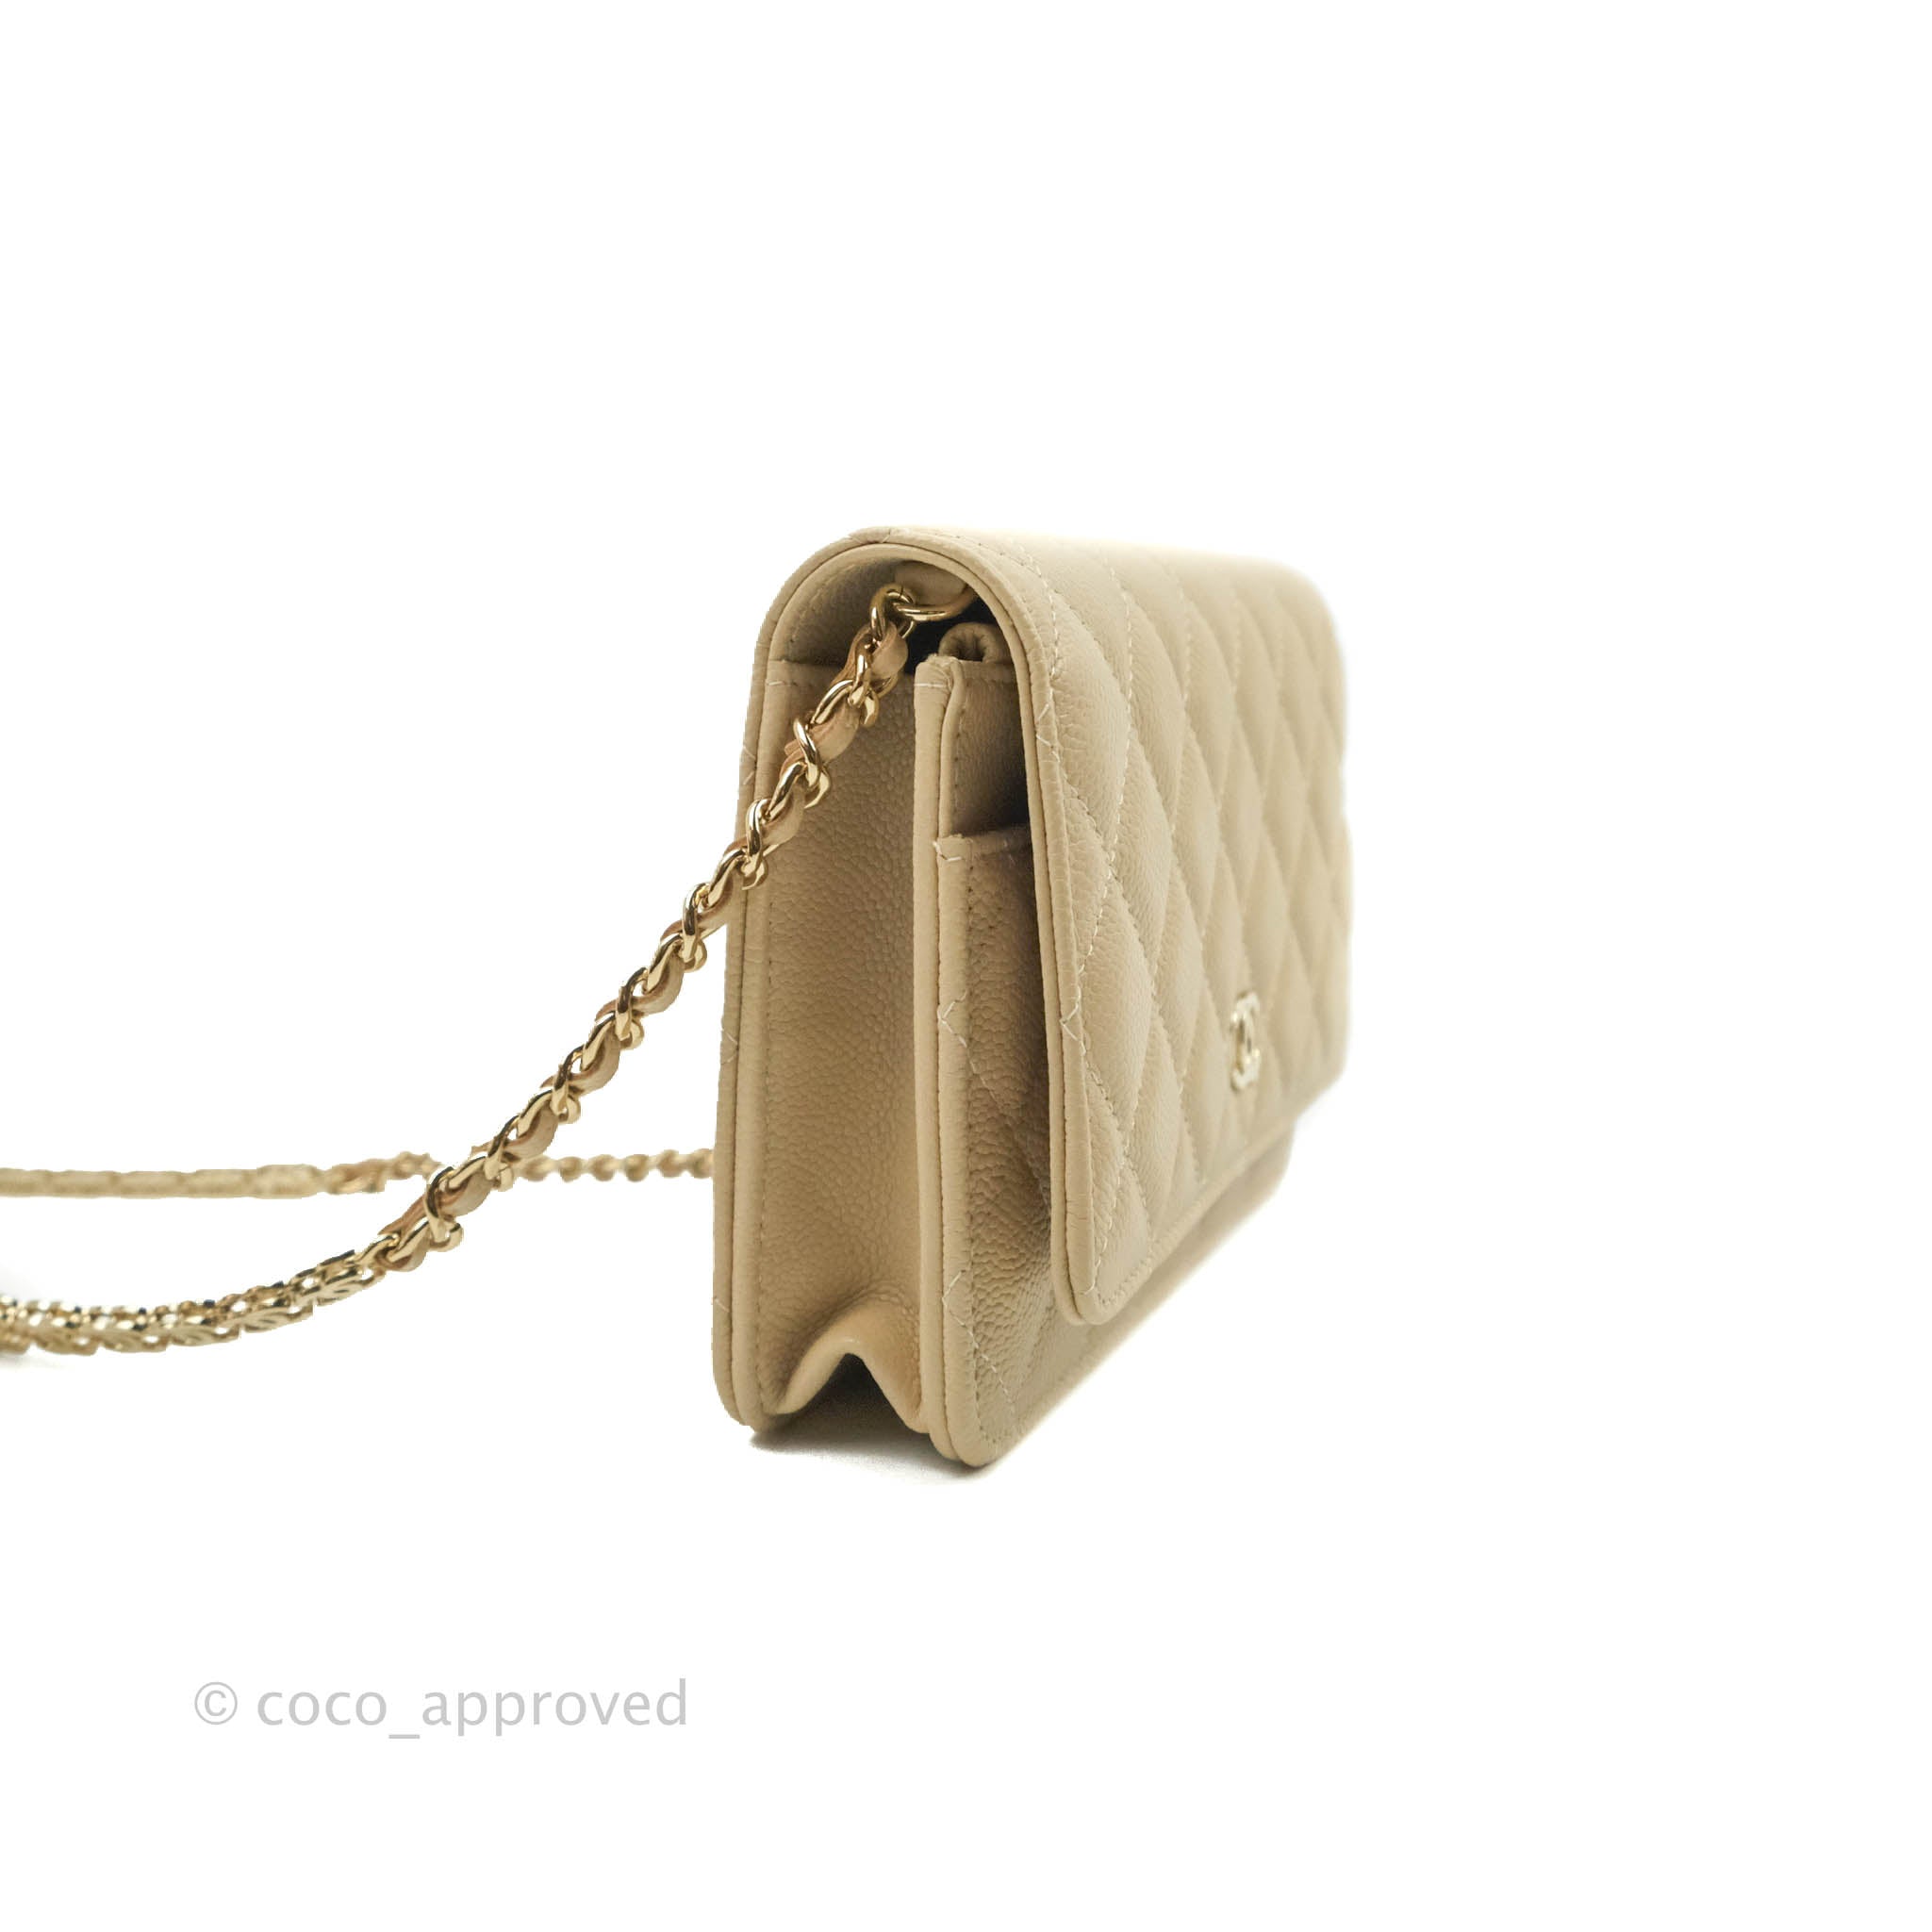 Chanel Patent Leather Wallet on Chain Crossbody Bag Beige